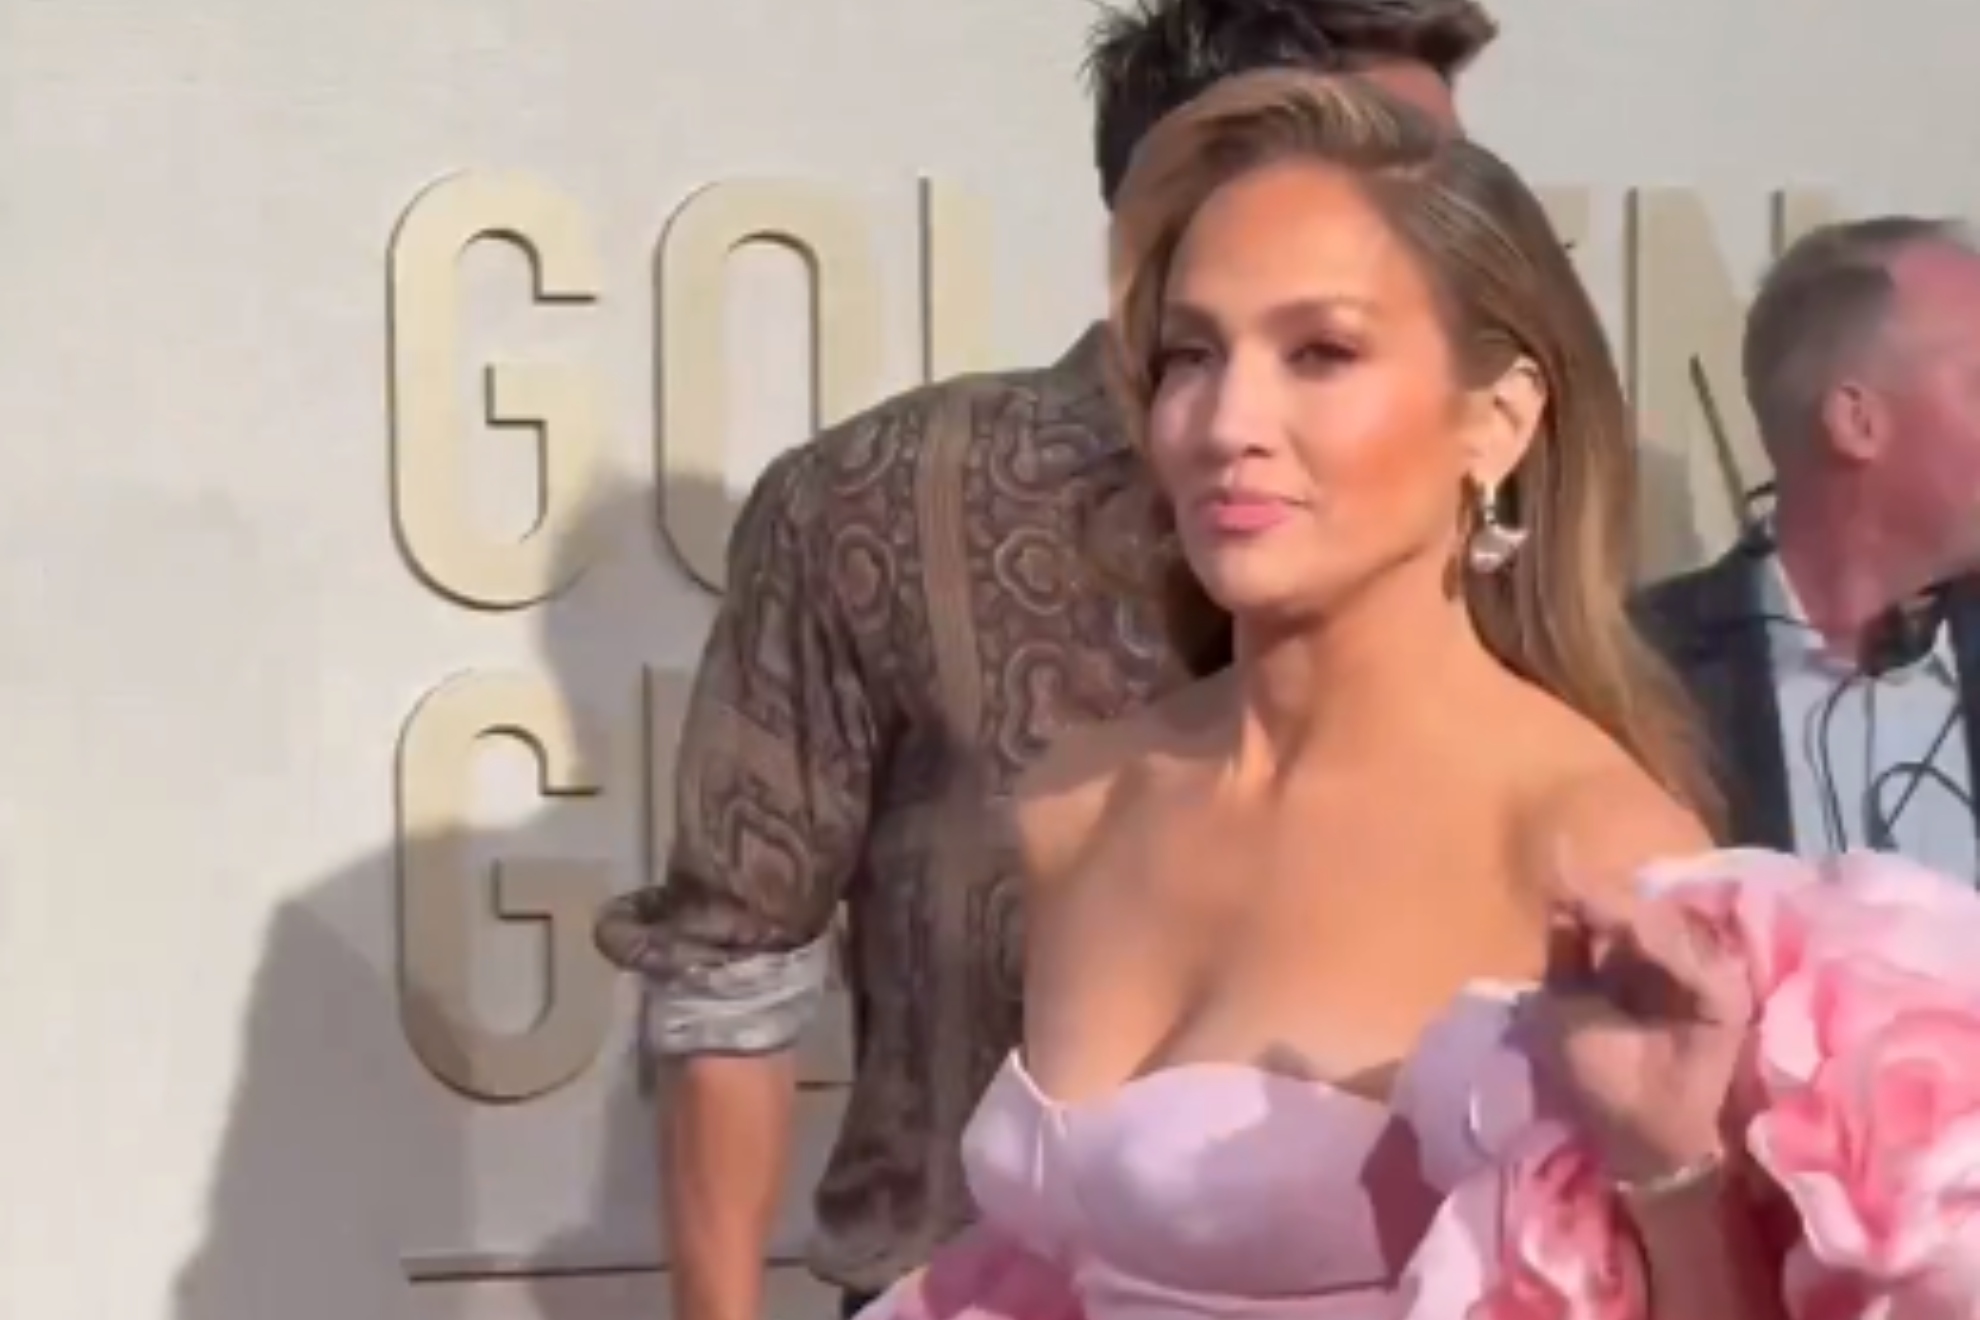 Jennifer Lopez and Ben Affleck fans react  after embarrassing interview questioning their marriage